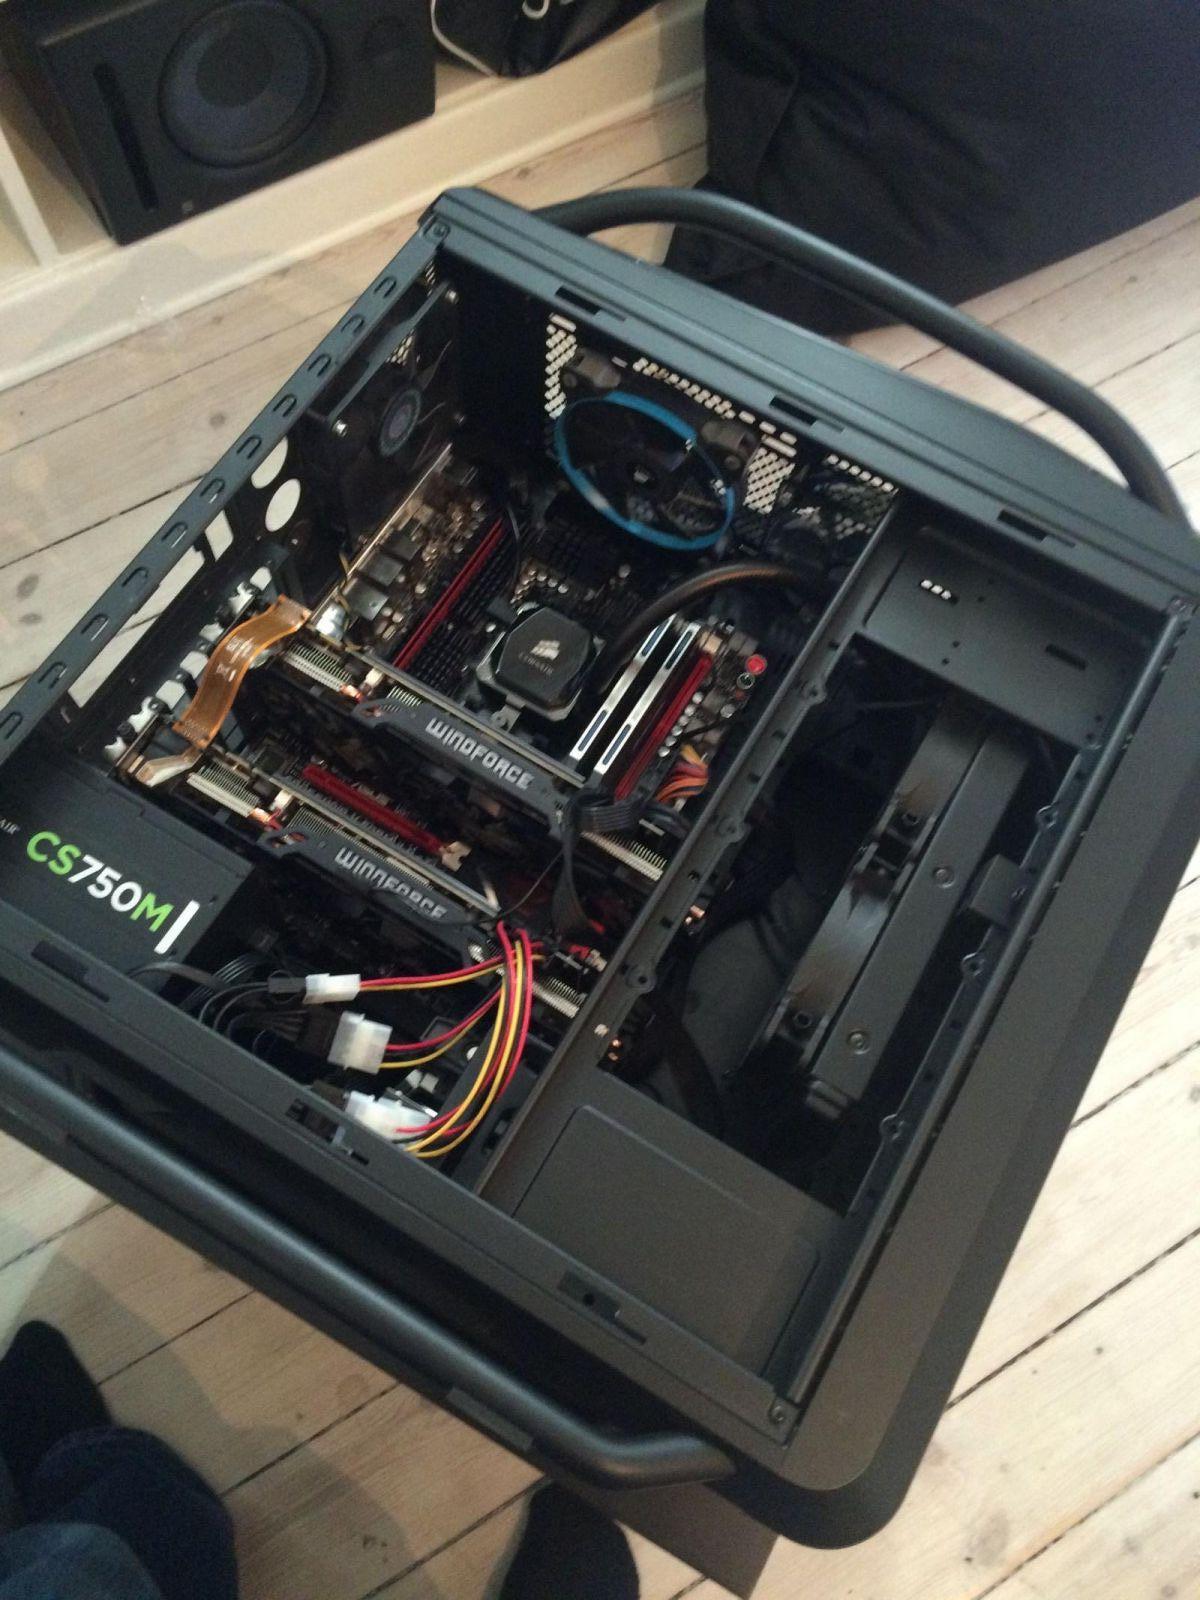 Air cooled PC